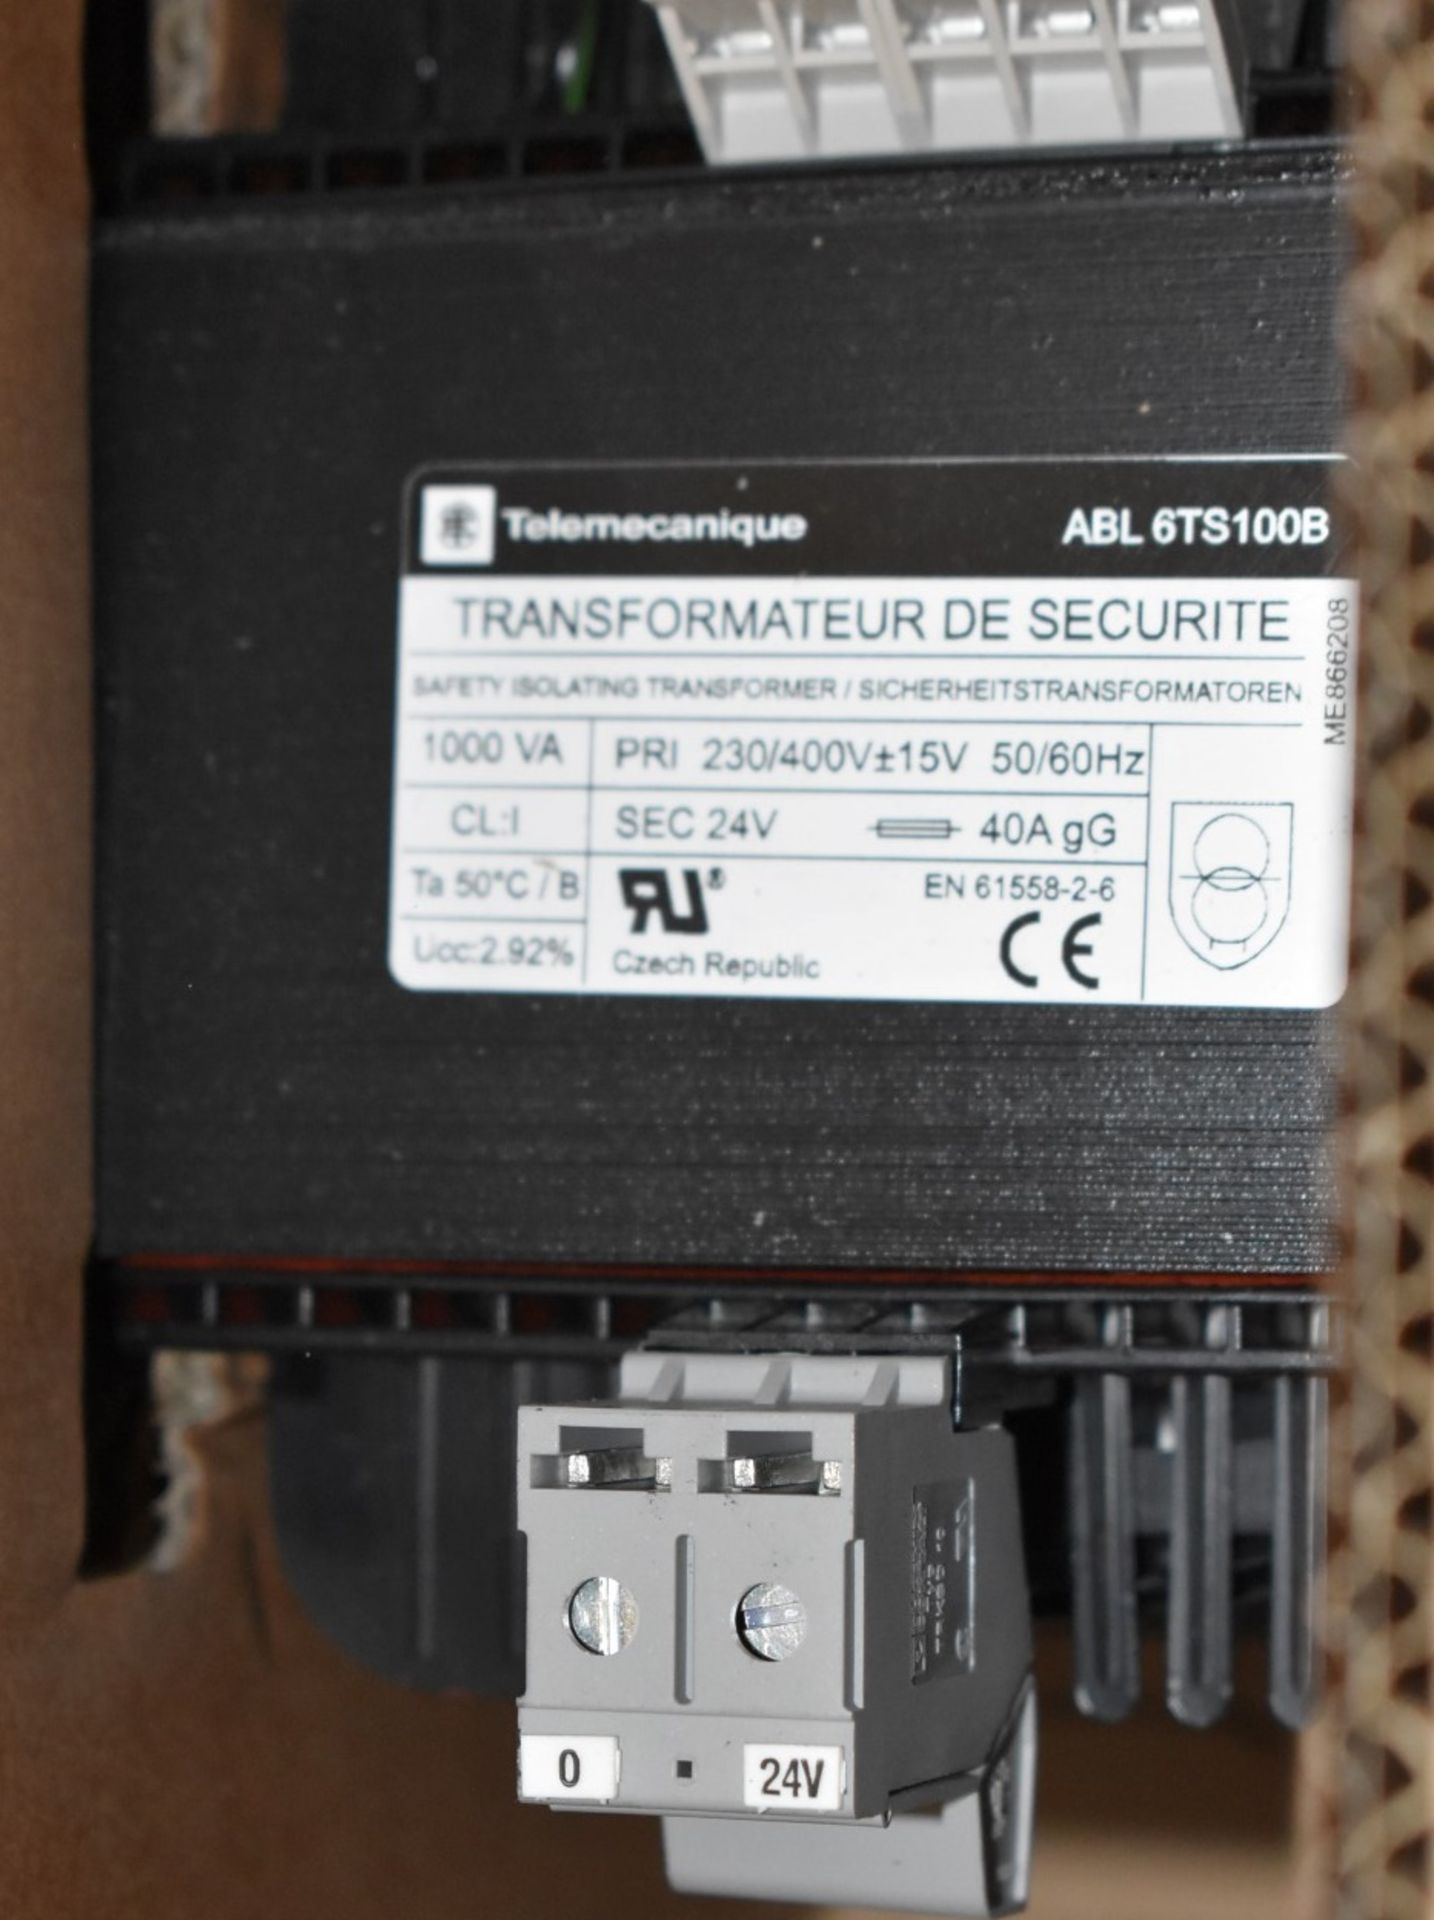 1 x Telemacanique 1000VA Safety Isolating Transformers - 230/400v - Type ABL 6TS100B - New Stock